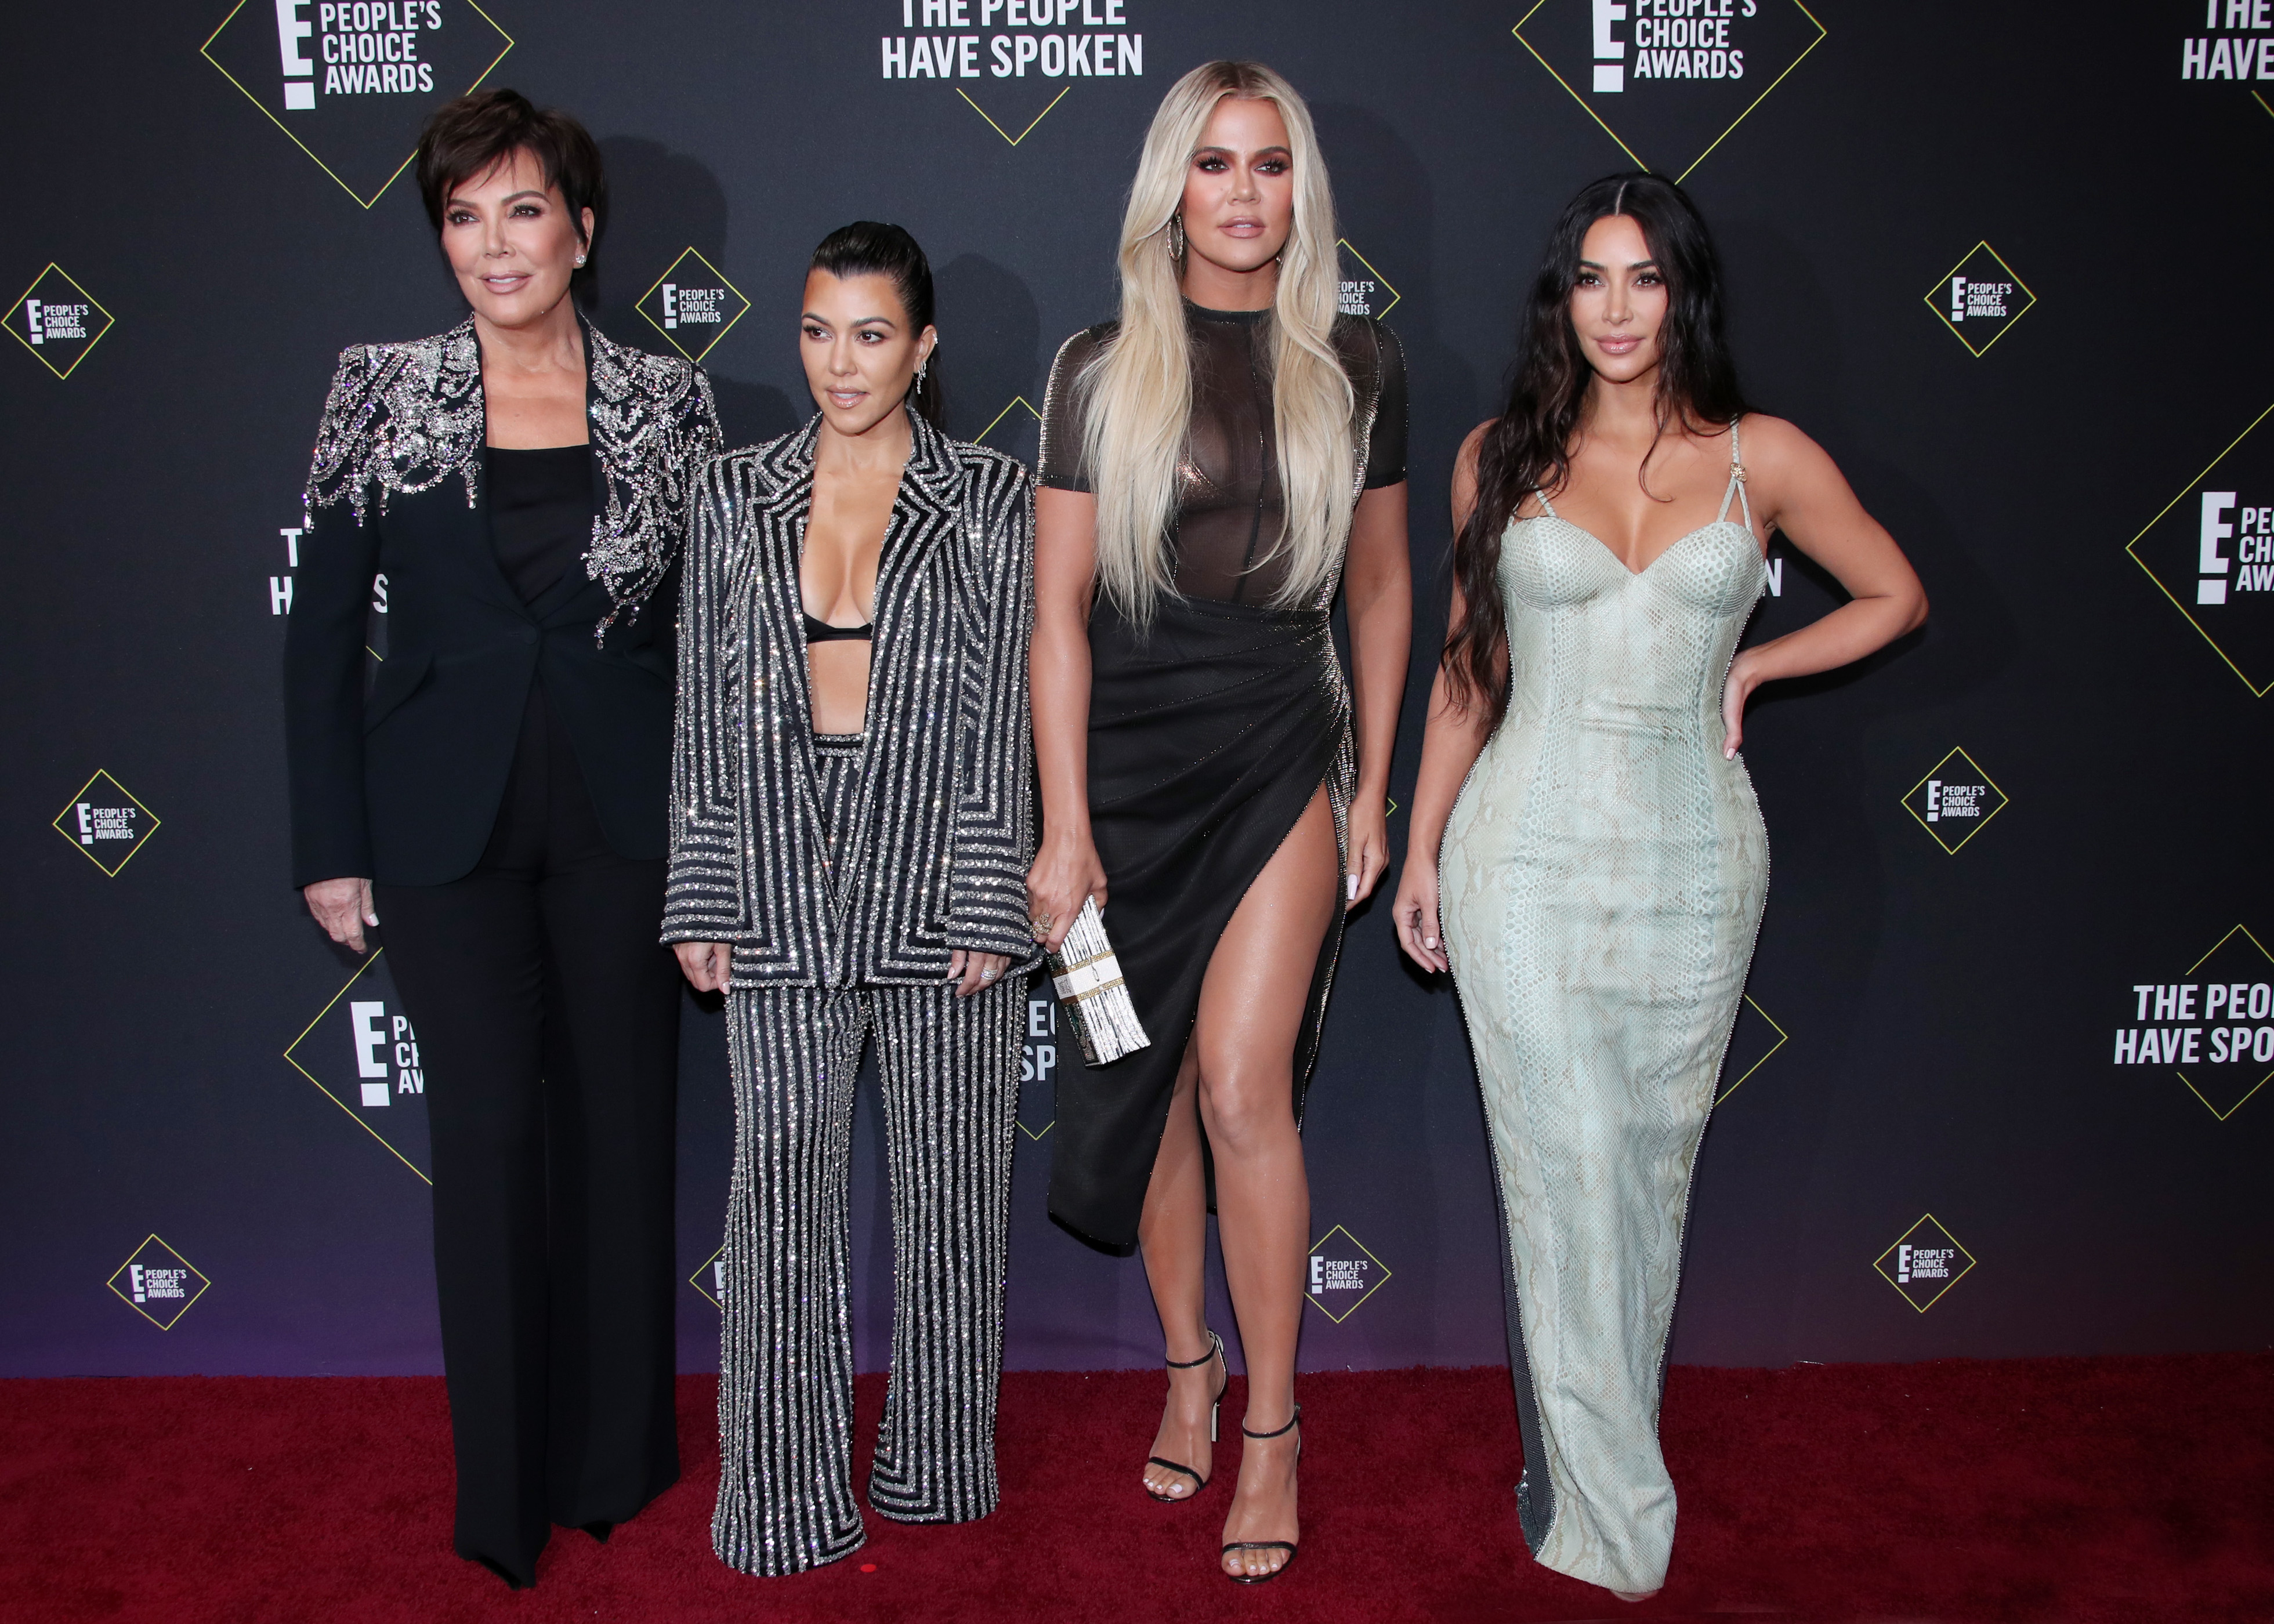 Kardashian And Jenner Heights Smallest To Tallest In The Famous Family